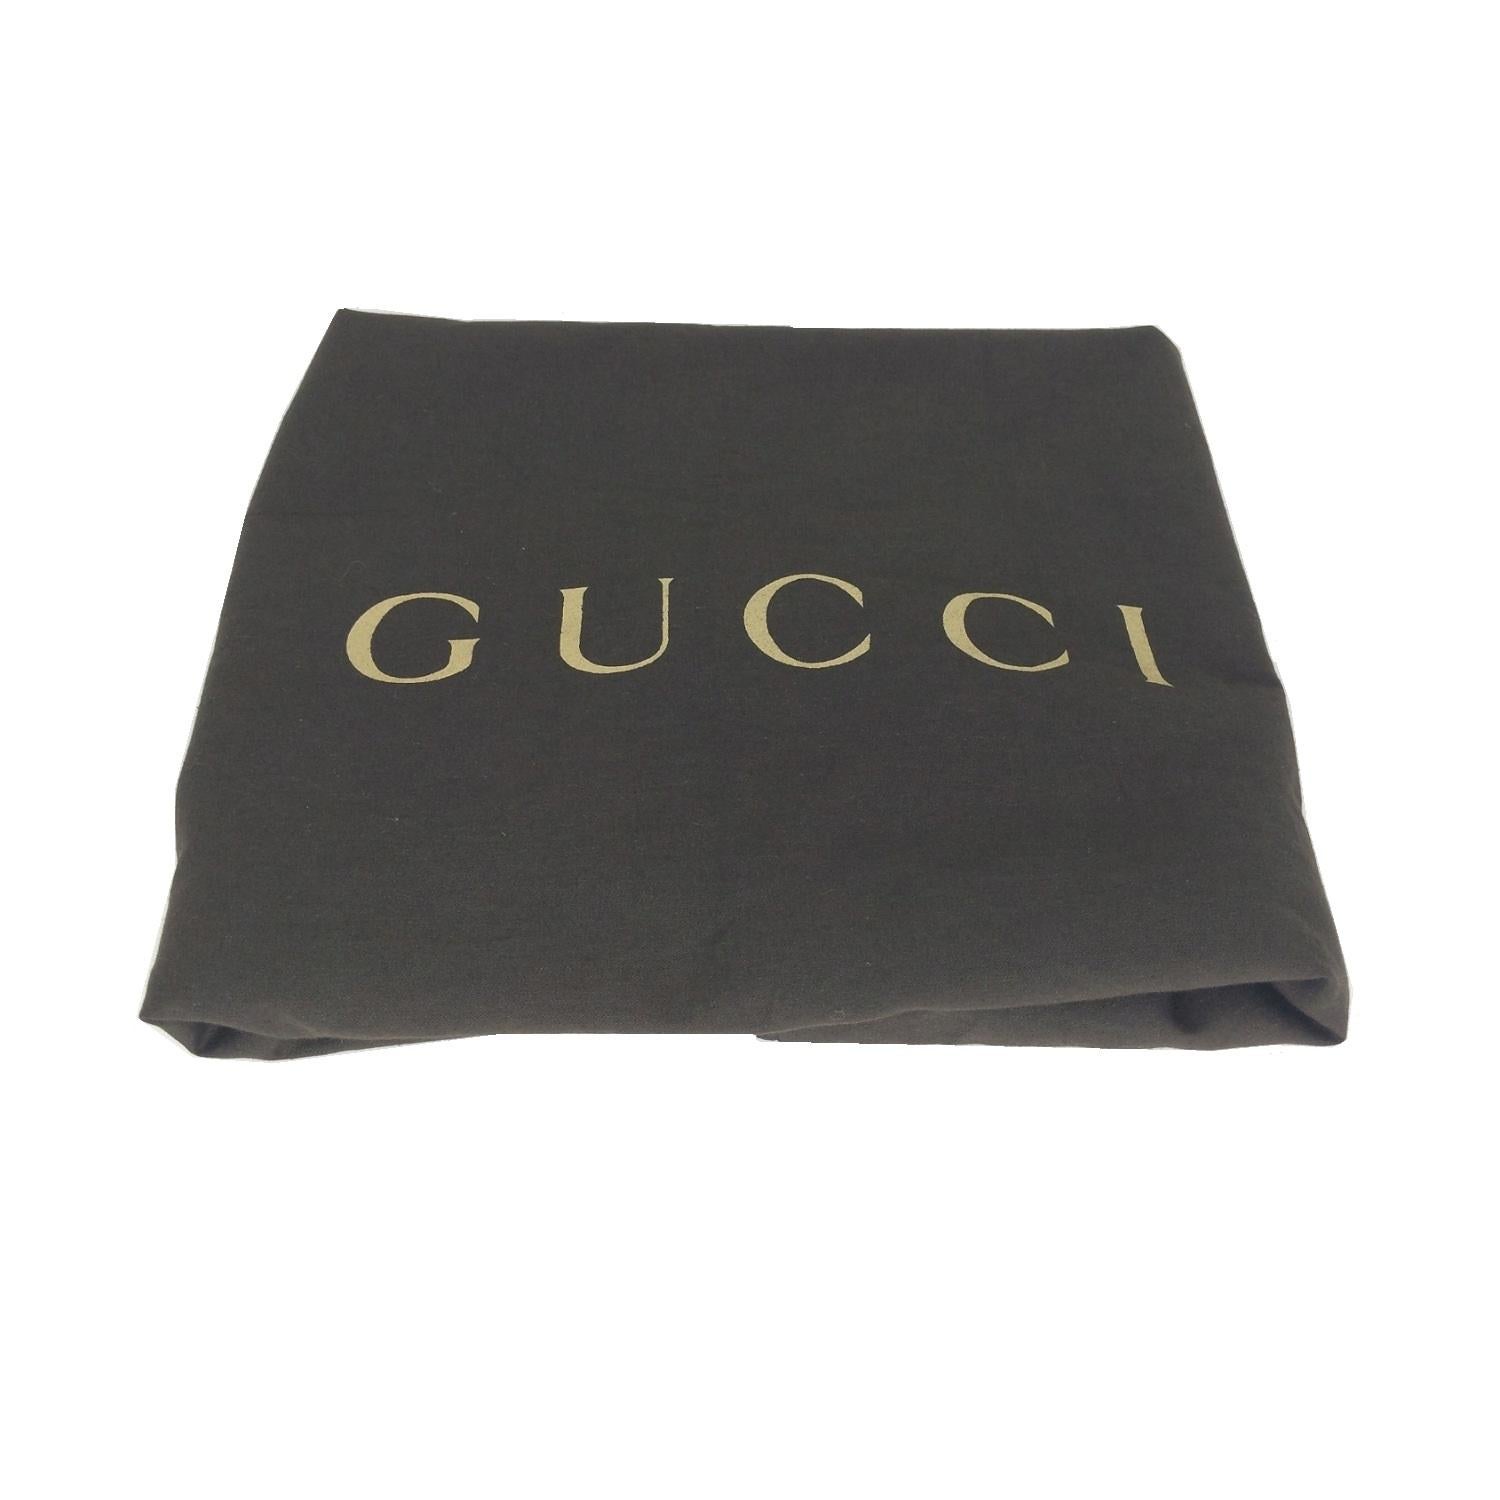 Gucci Techno Web Fabric Wheeled Carry-On Suitcase 1